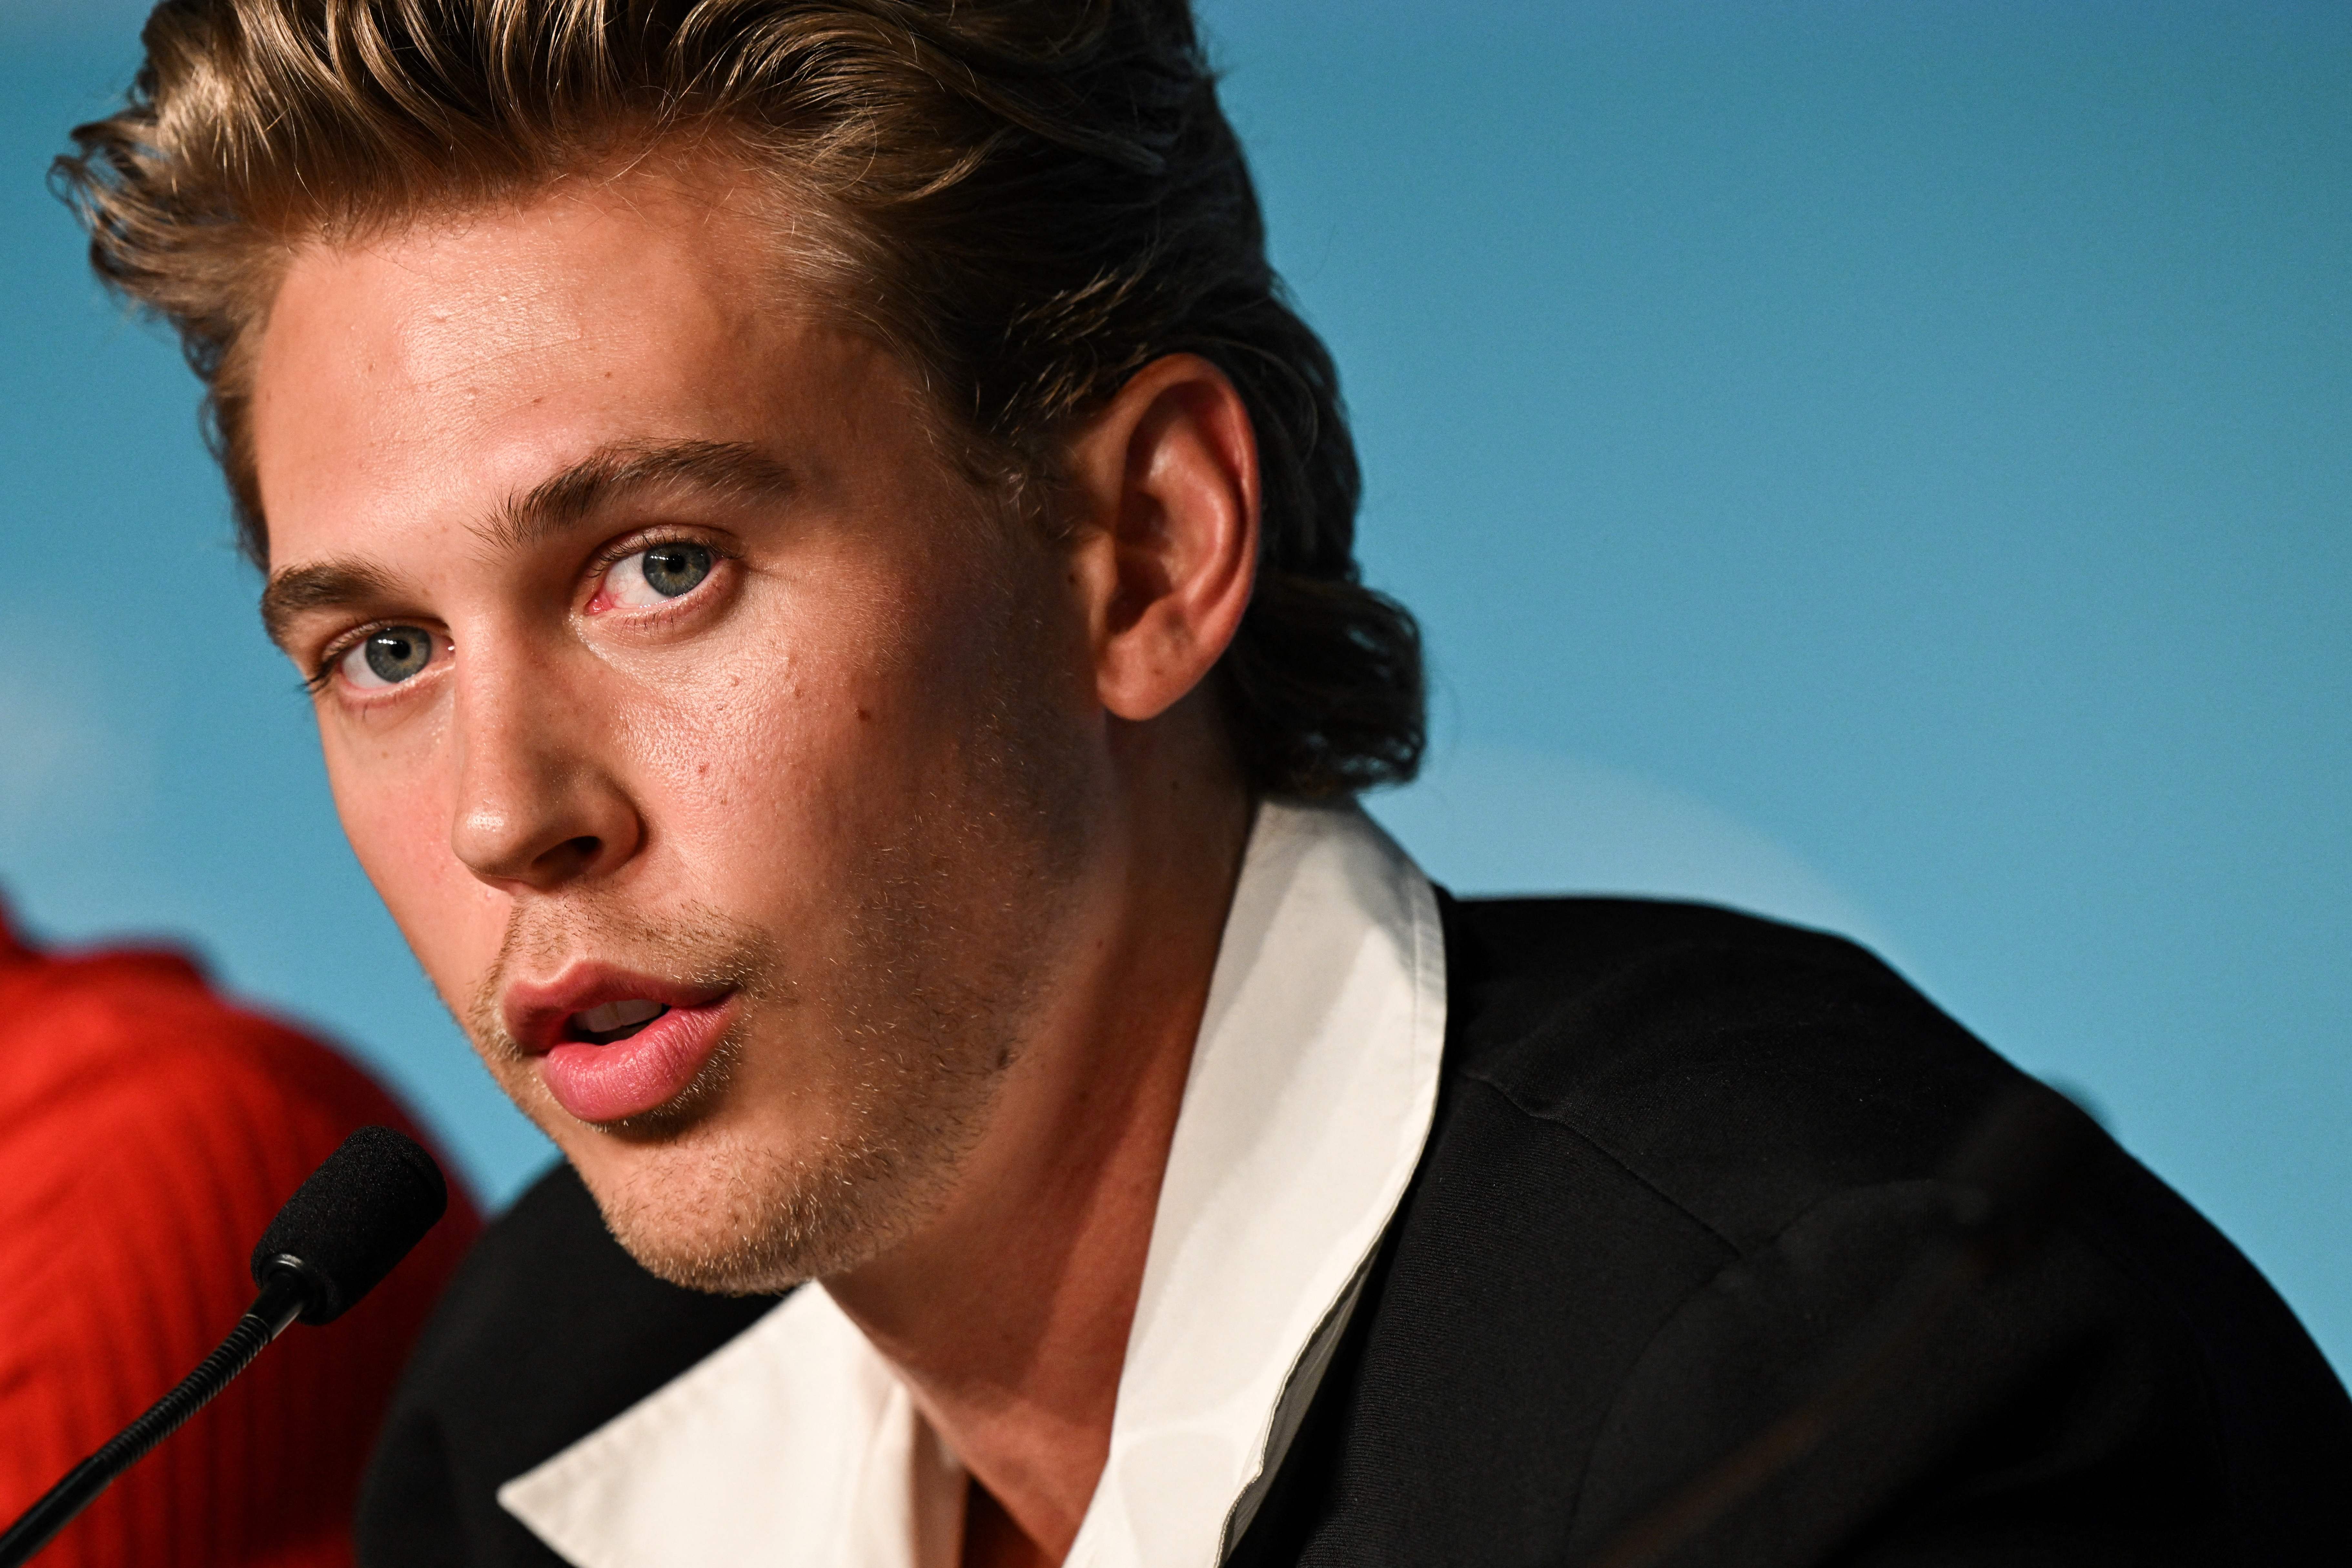 ‘Elvis’: Austin Butler Was Still Acting Like Elvis Presley While Working on His Next Project